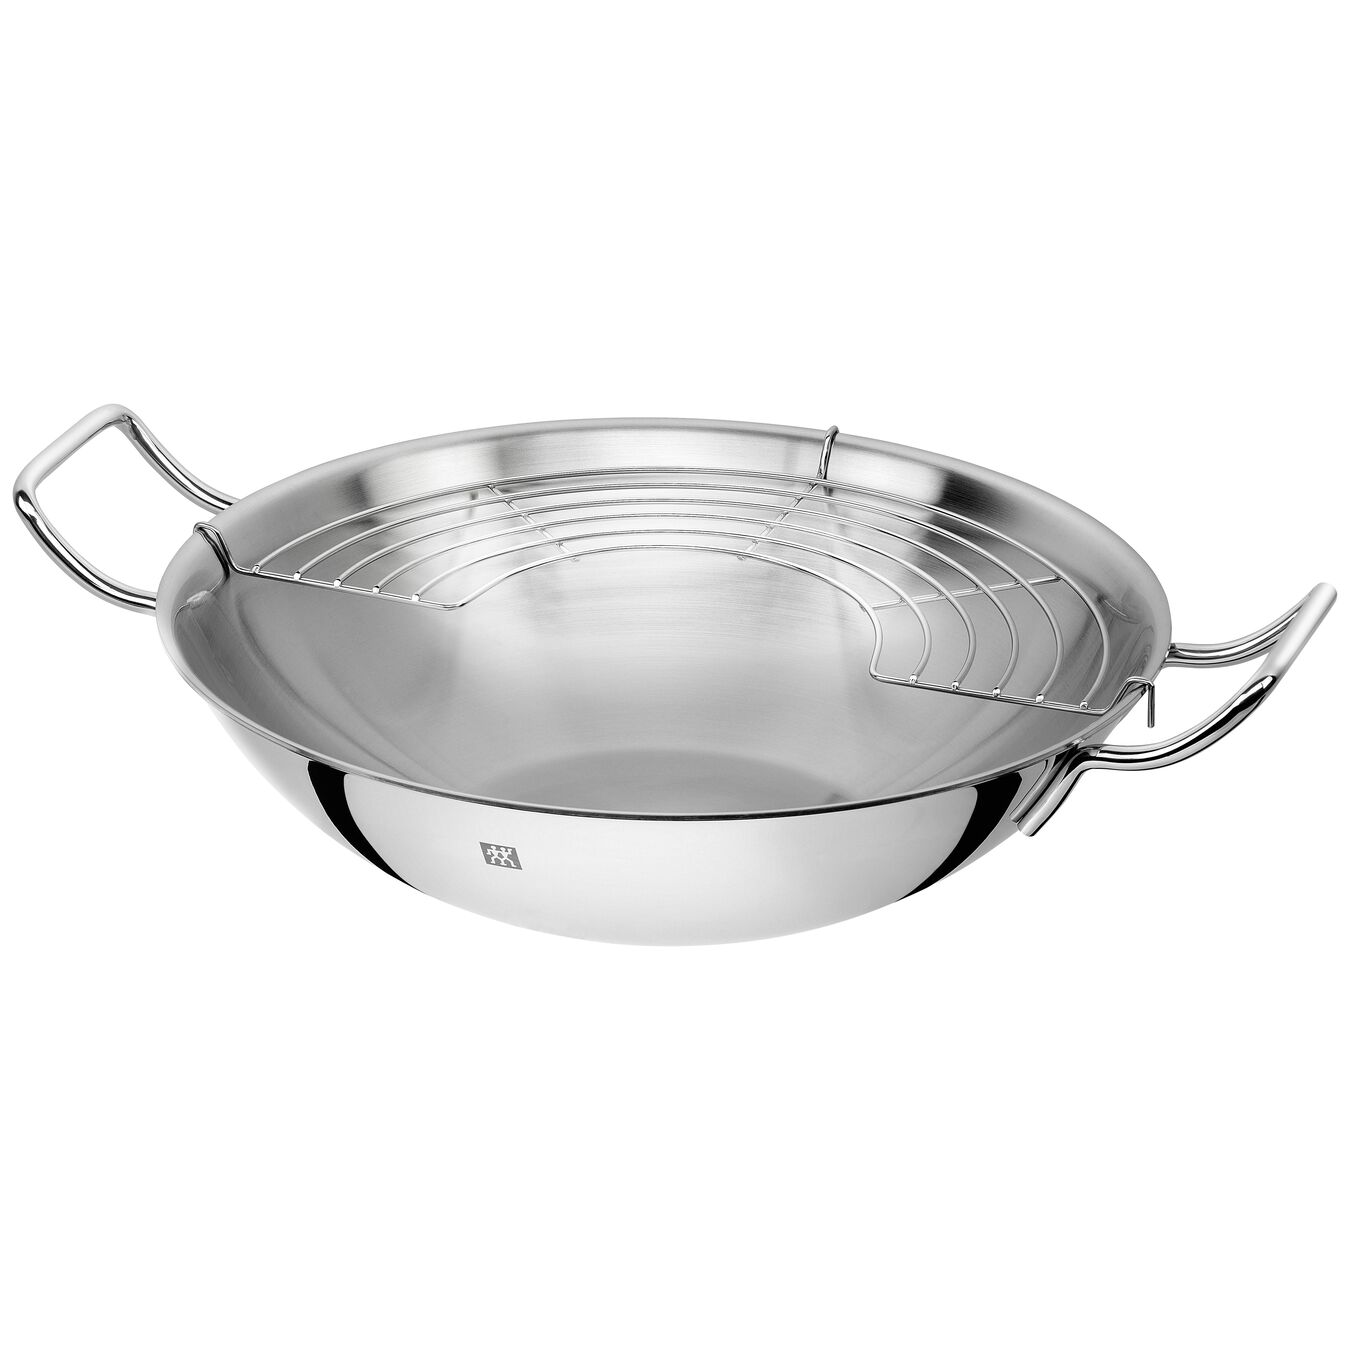 32 cm 18/10 Stainless Steel Wok,,large 8